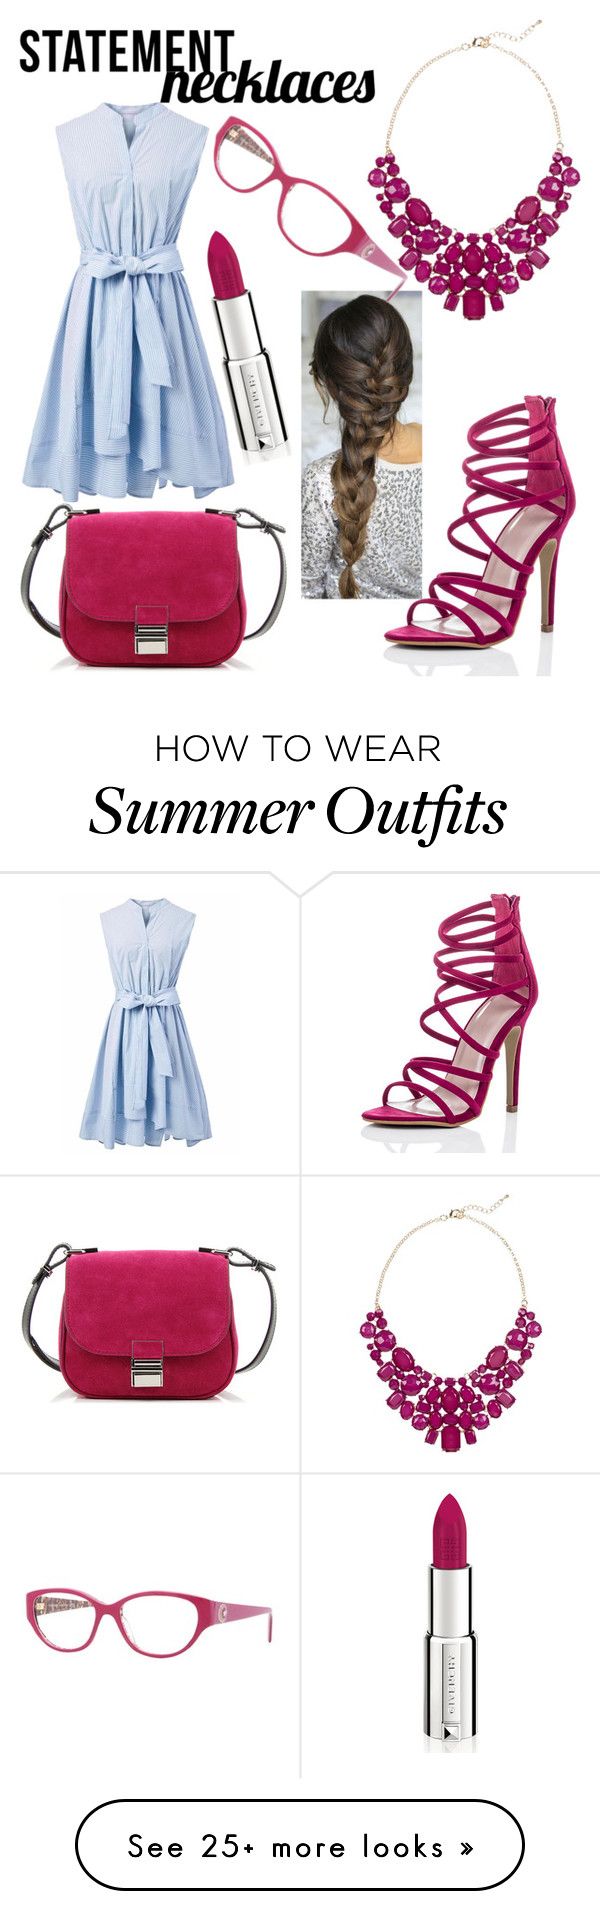 "Statement Necklace Contest Outfit" by keearnest on Polyvore featuring...